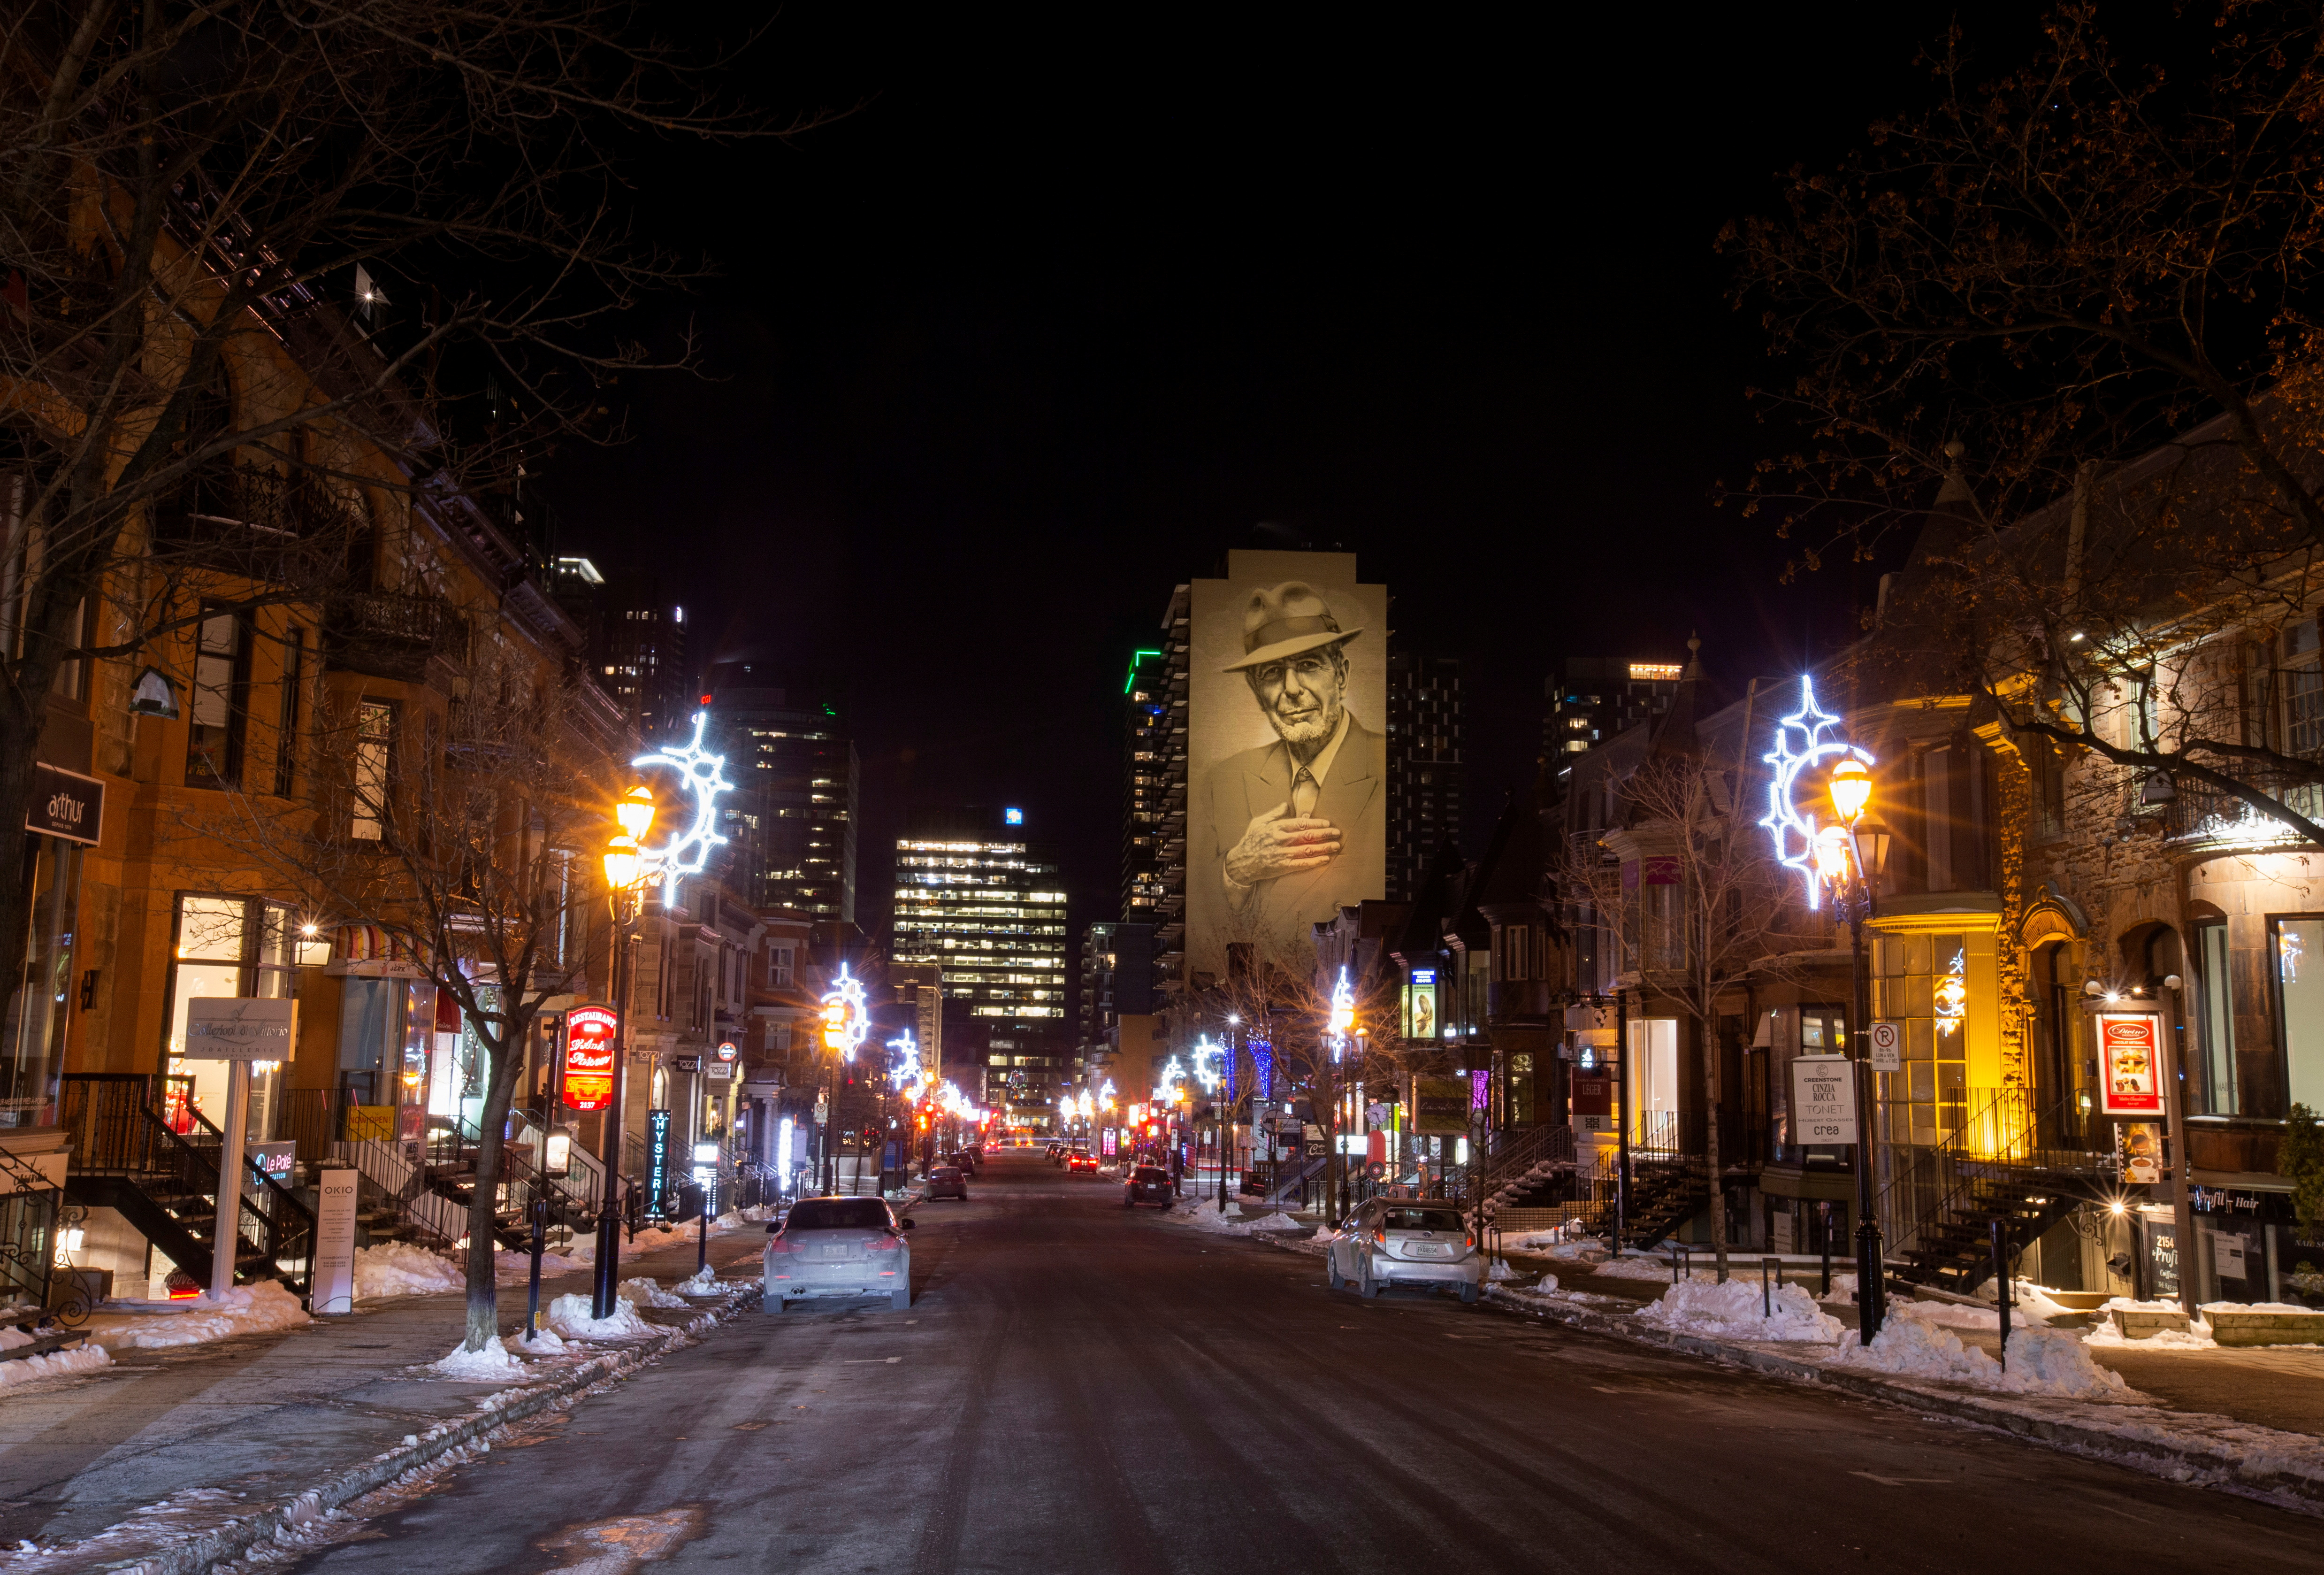 Crescent Street, a street known for its nightlife, is seen on the first night curfew imposed by the Quebec government